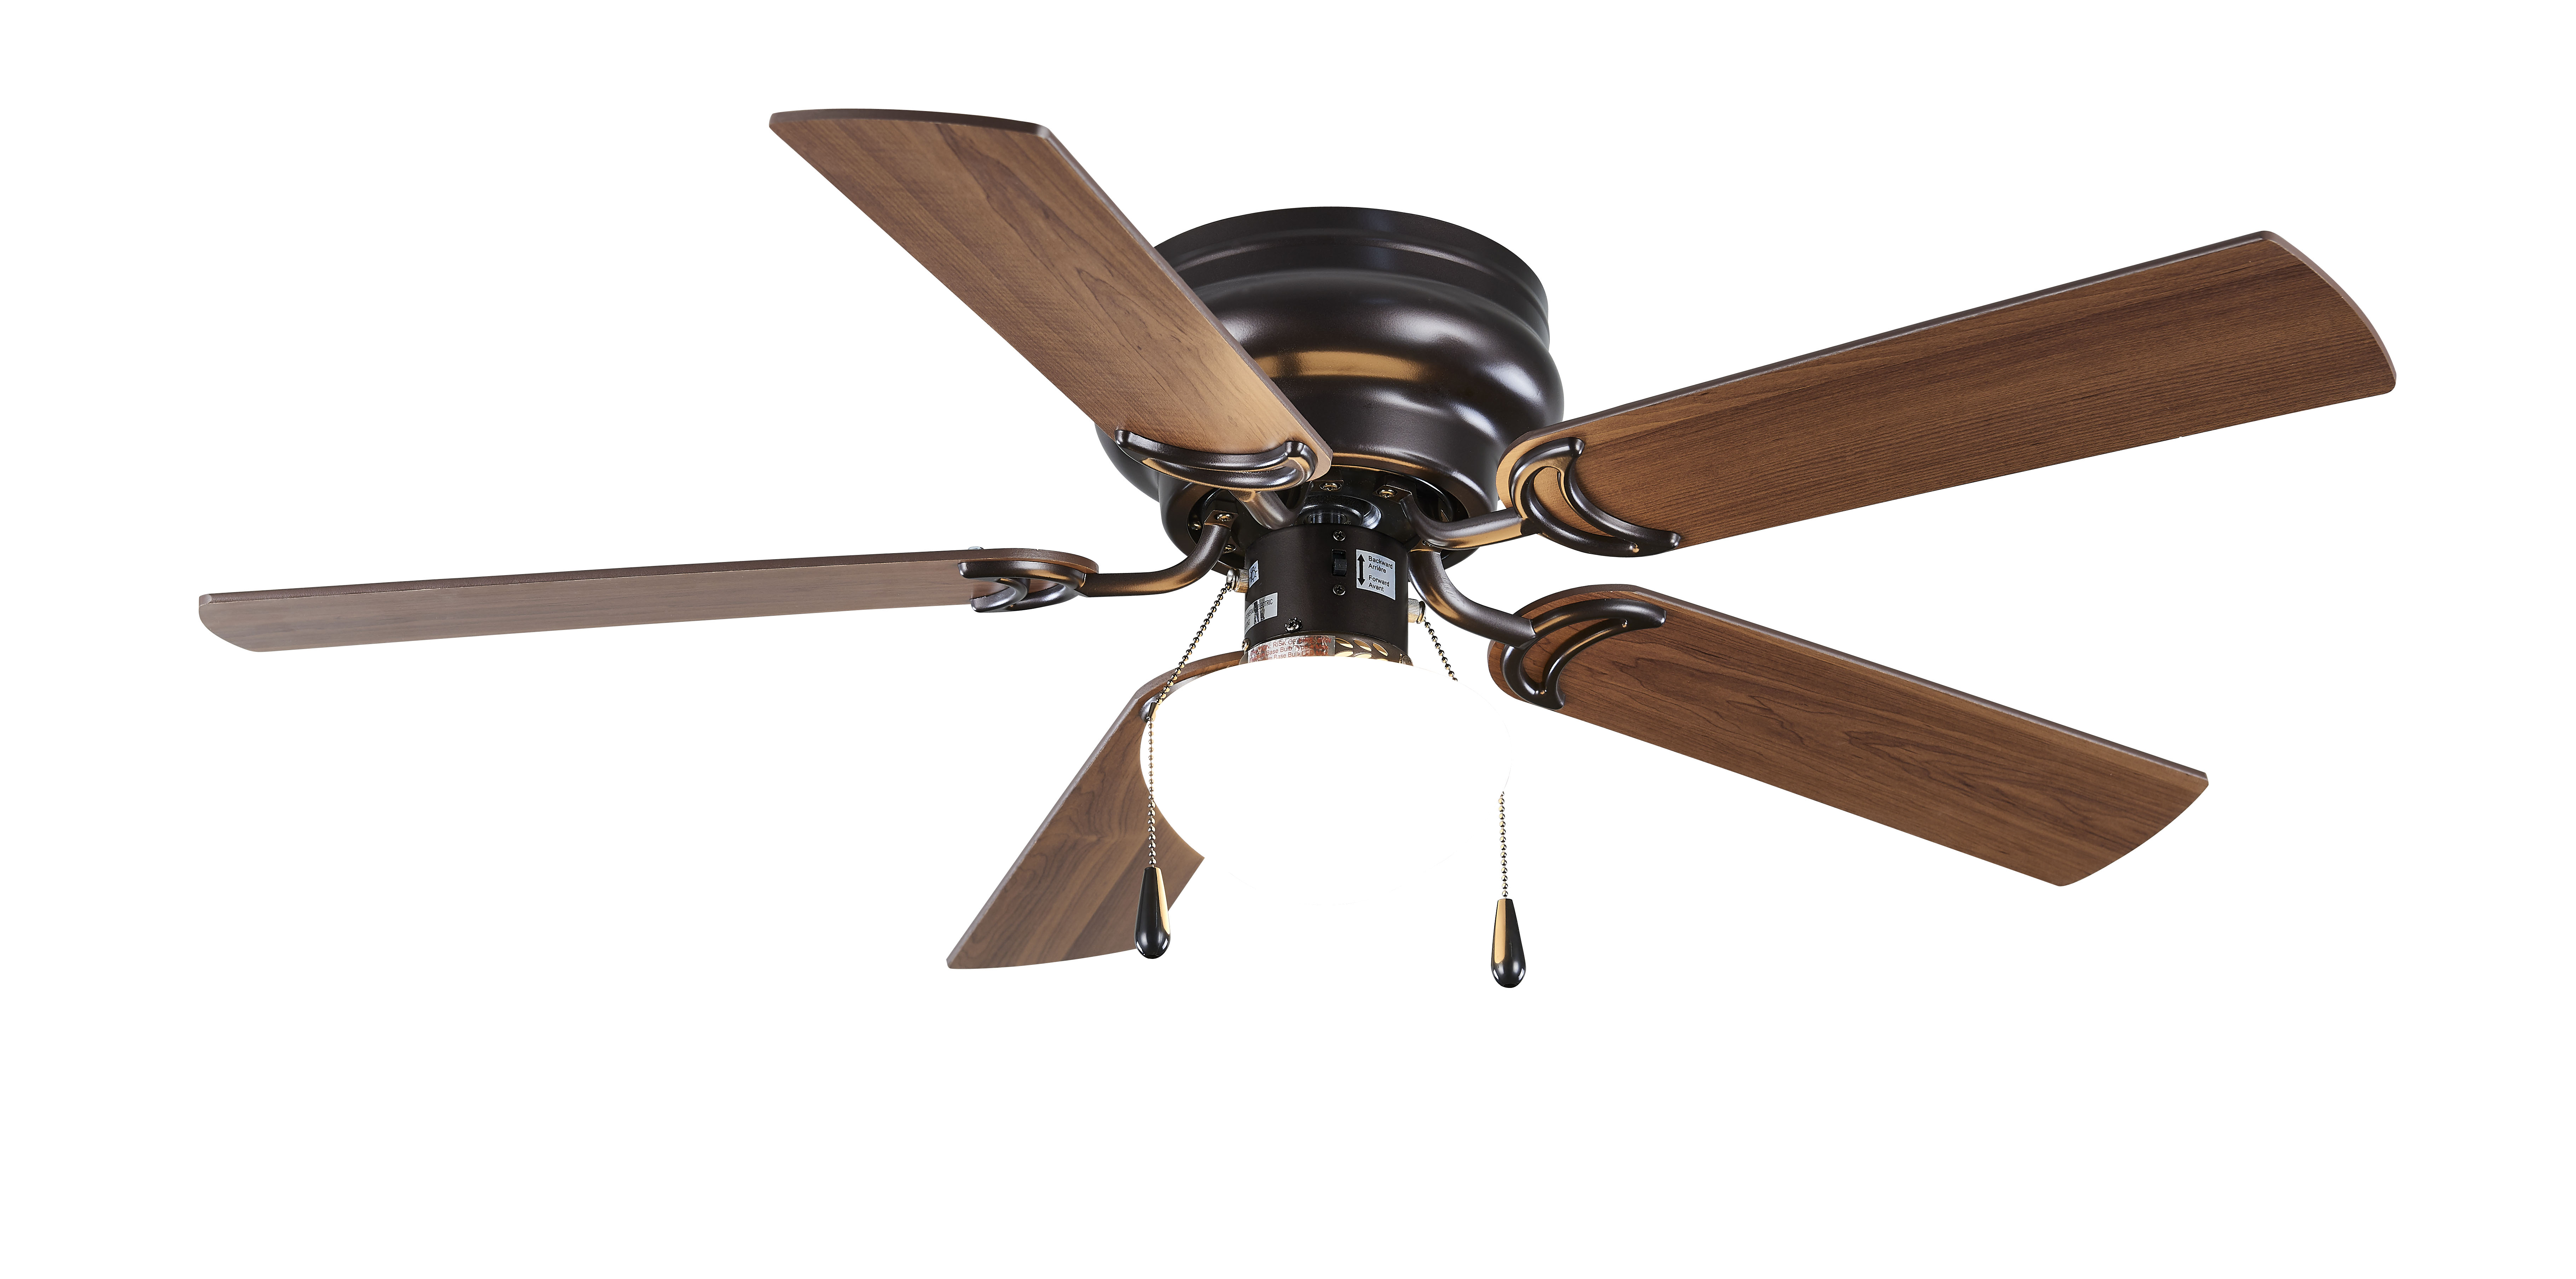 Mainstays 44" Hugger Indoor Ceiling Fan with Single Light, Bronze, 5 Blades, LED Bulb, Reverse Airflow - image 4 of 8